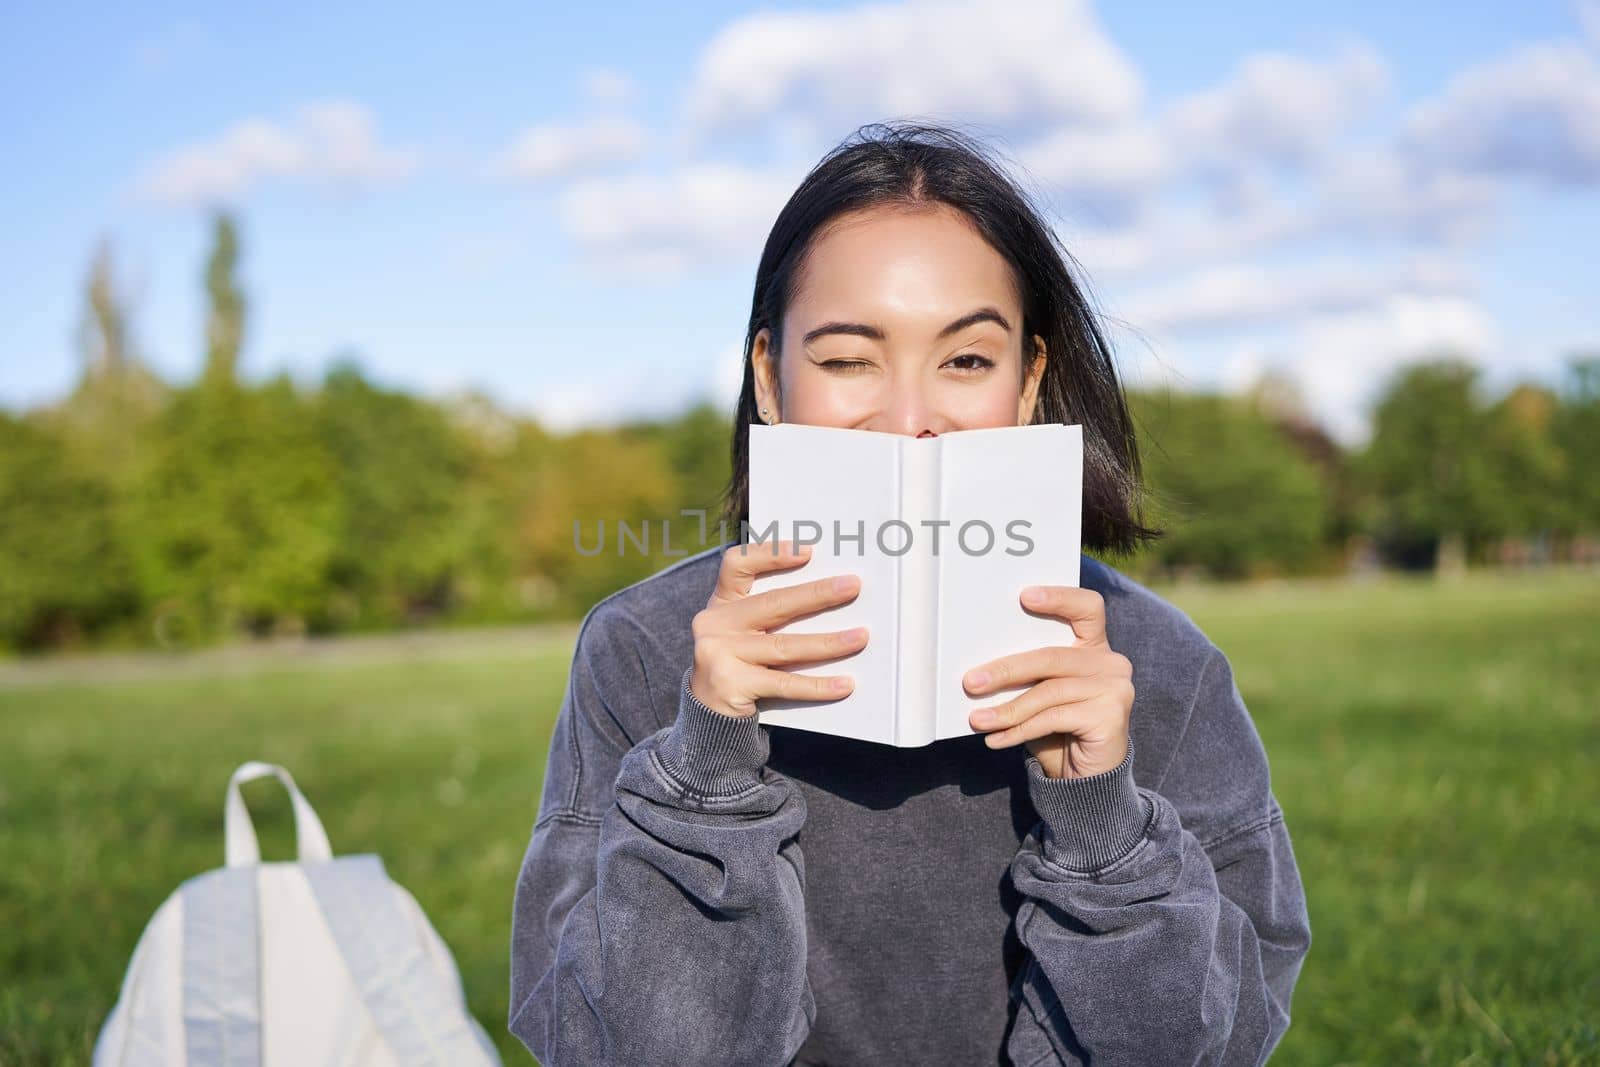 Beautiful asian girl sitting in park on grass, reading and smiling. Woman with book enjoying sunny day outdoors by Benzoix